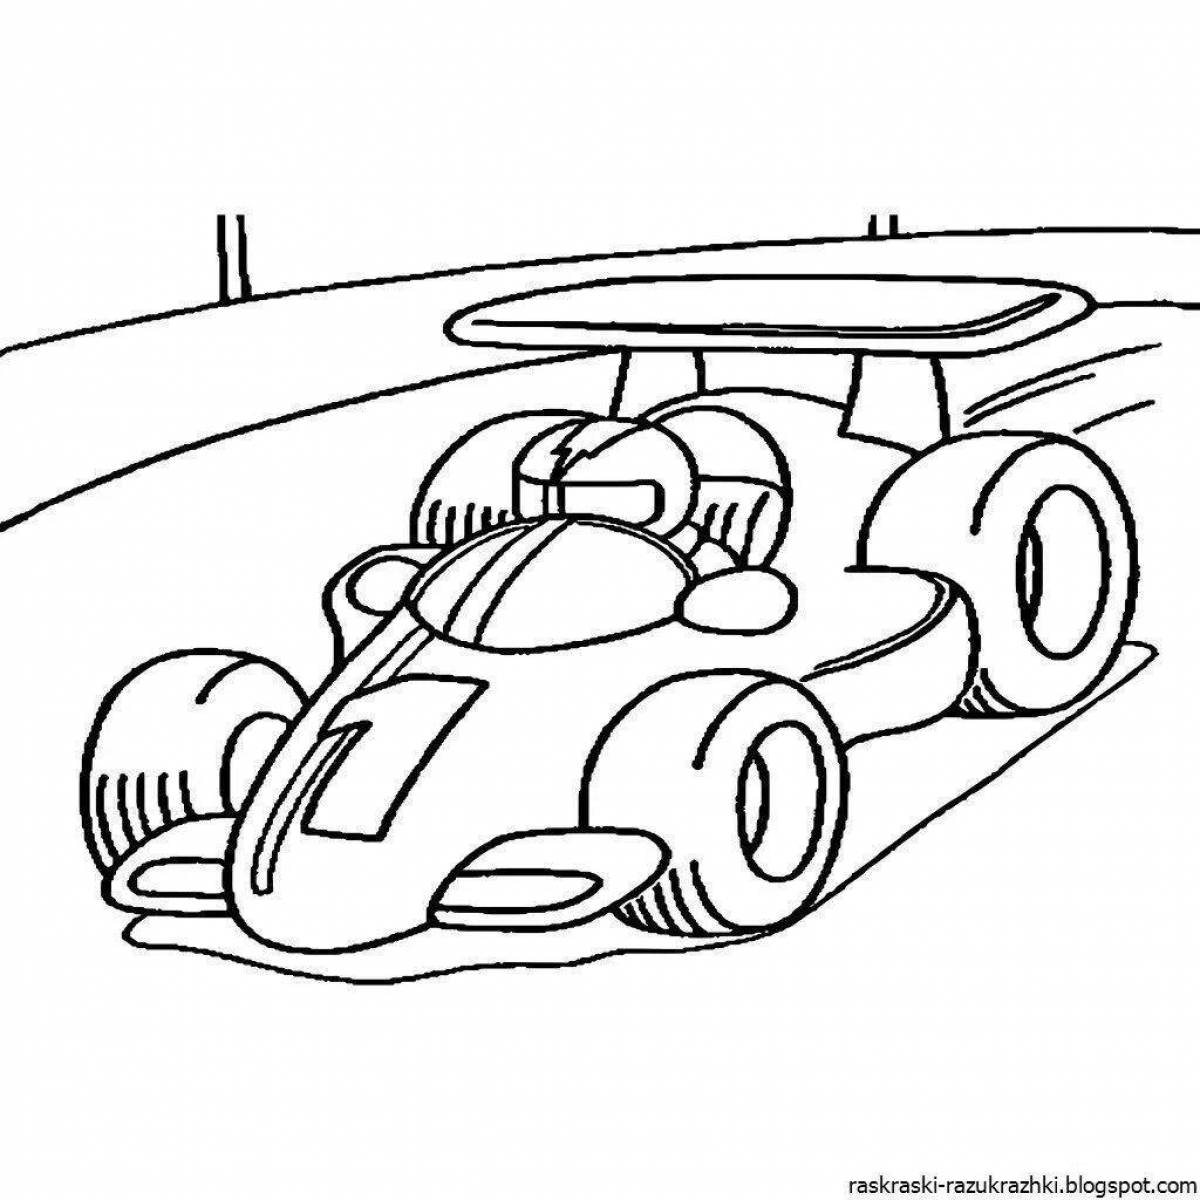 Exquisite racing car coloring for kids